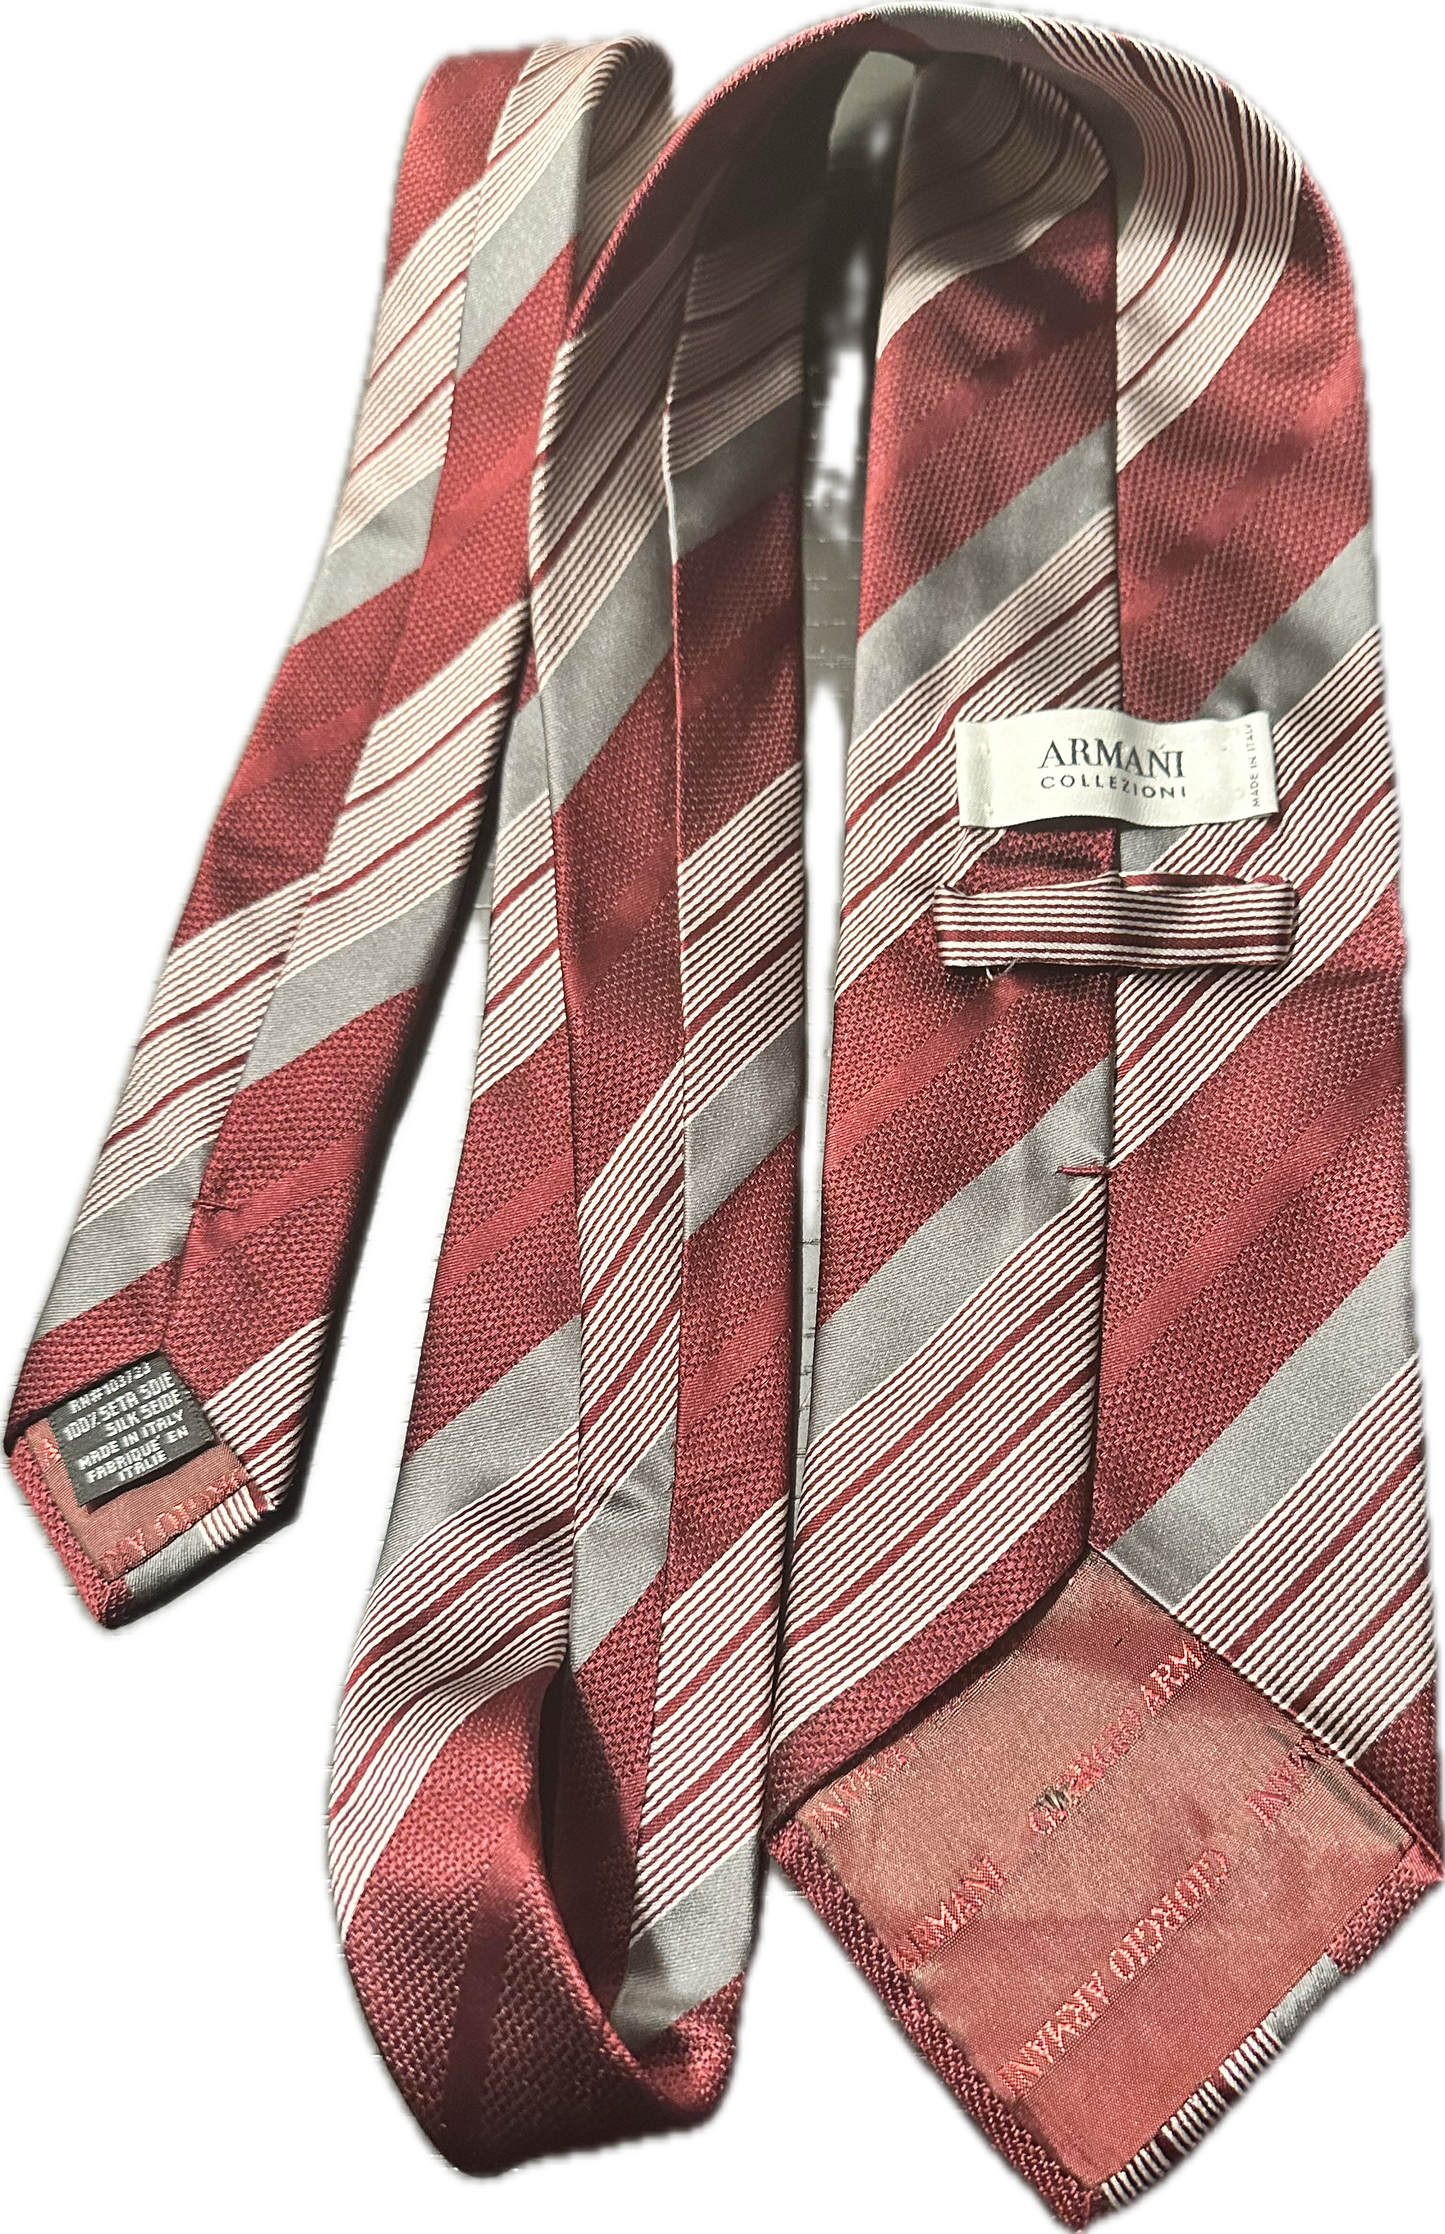 THE OFFICE: Dwight’s Striped Necktie Collection